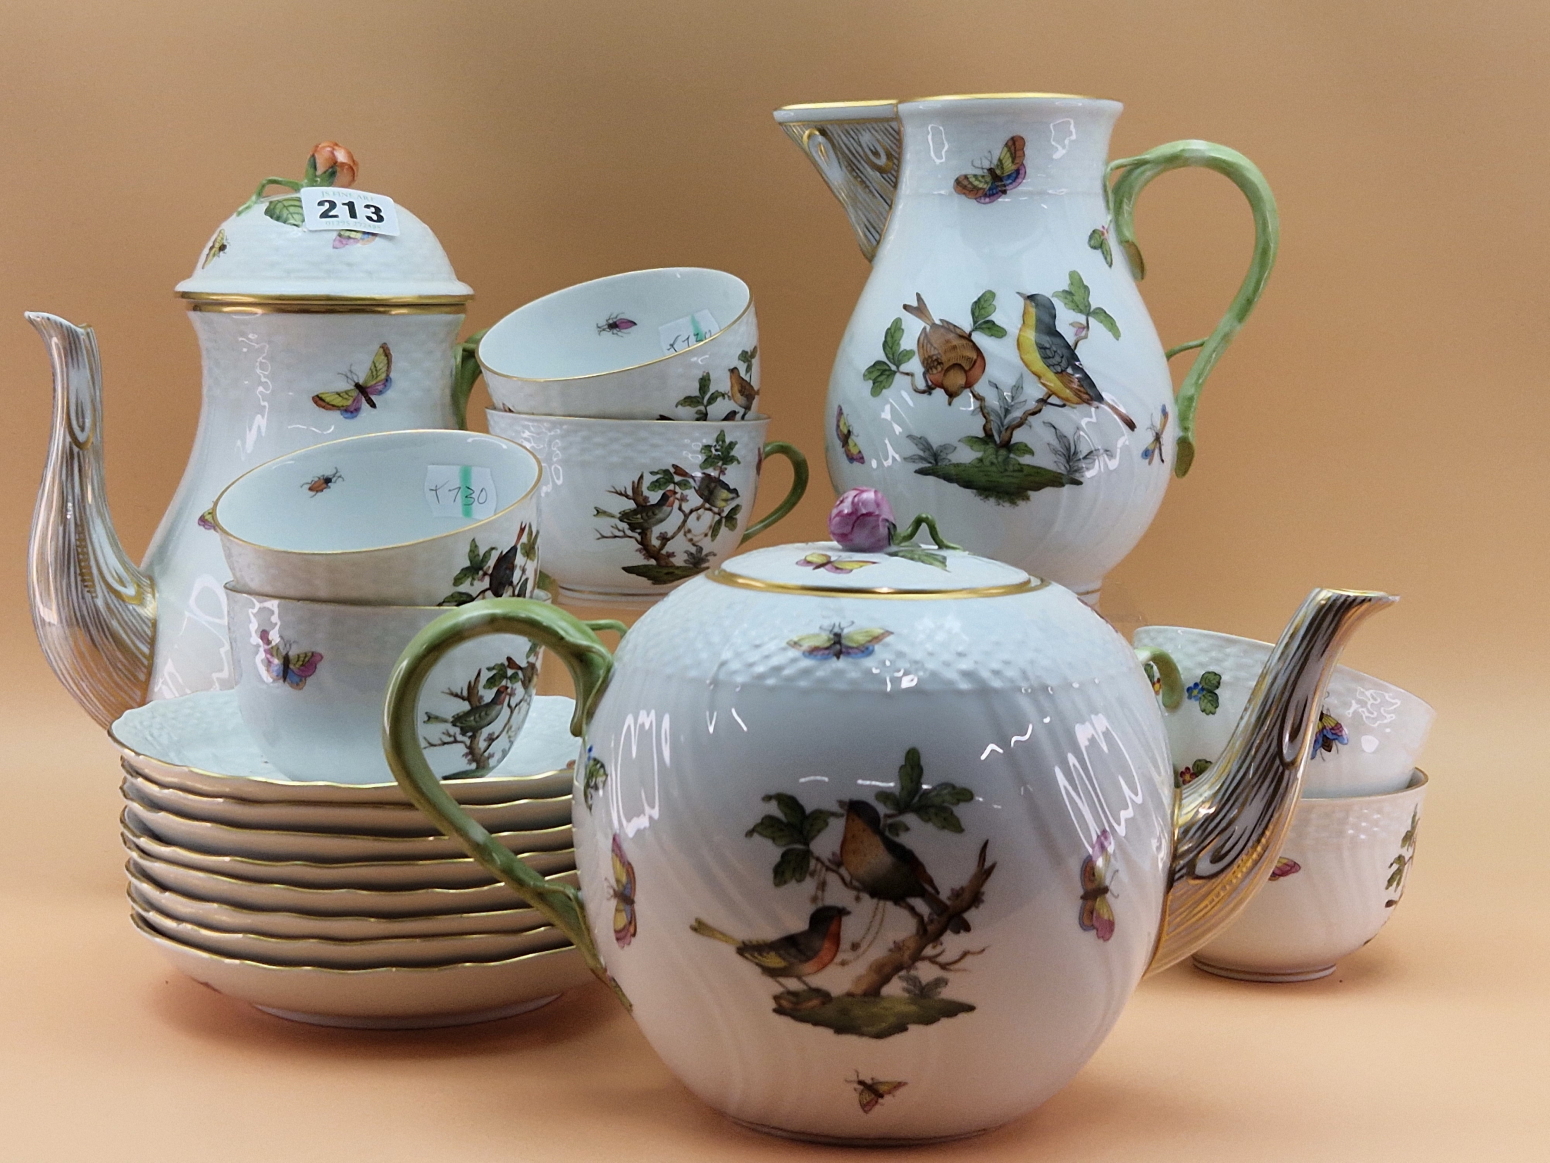 A HEREND PART TEA AND COFFEE SET, COMPRISING: EIGHT CUPS AND SAUCERS, A MILK JUG, A COVERED TEA - Image 2 of 8